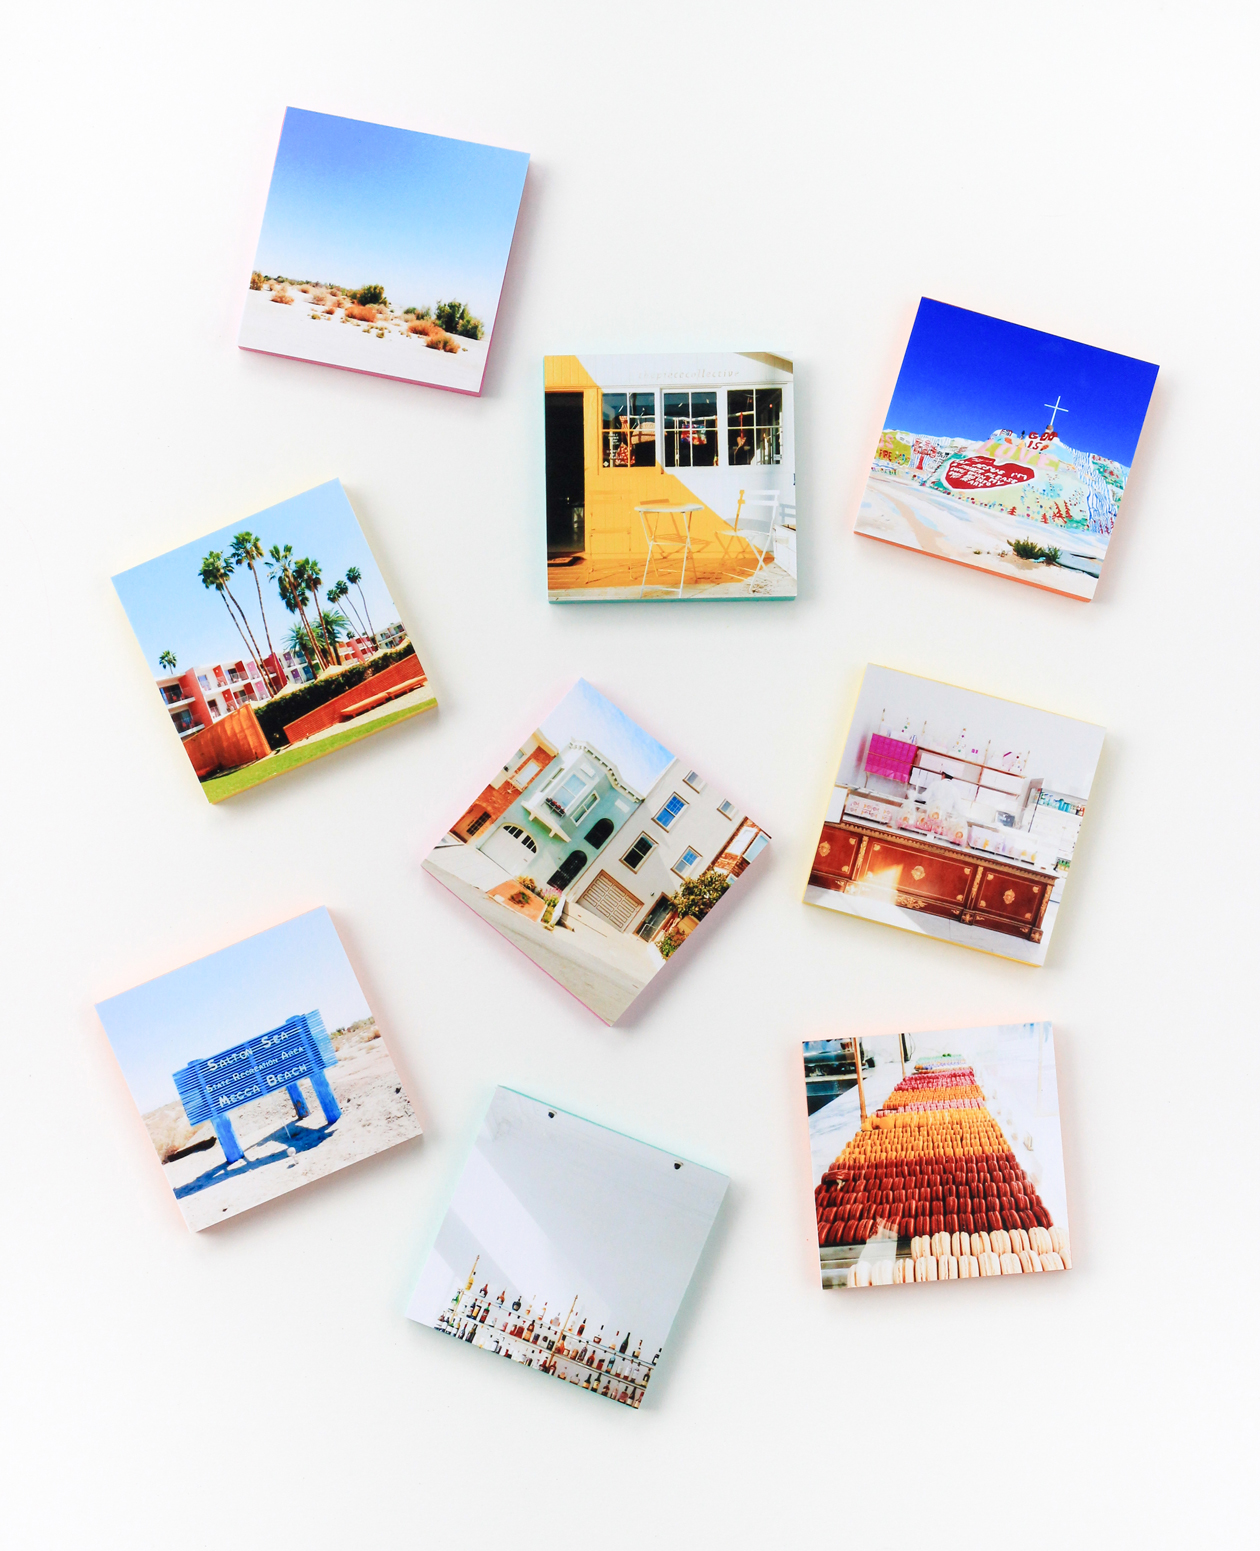 Take your photos off your phone and onto your walls with this easy home decor diy! Learning How to Turn your Instagram Photos into Wall Art in just a few simple steps. Customize to your home decor and swap out often!